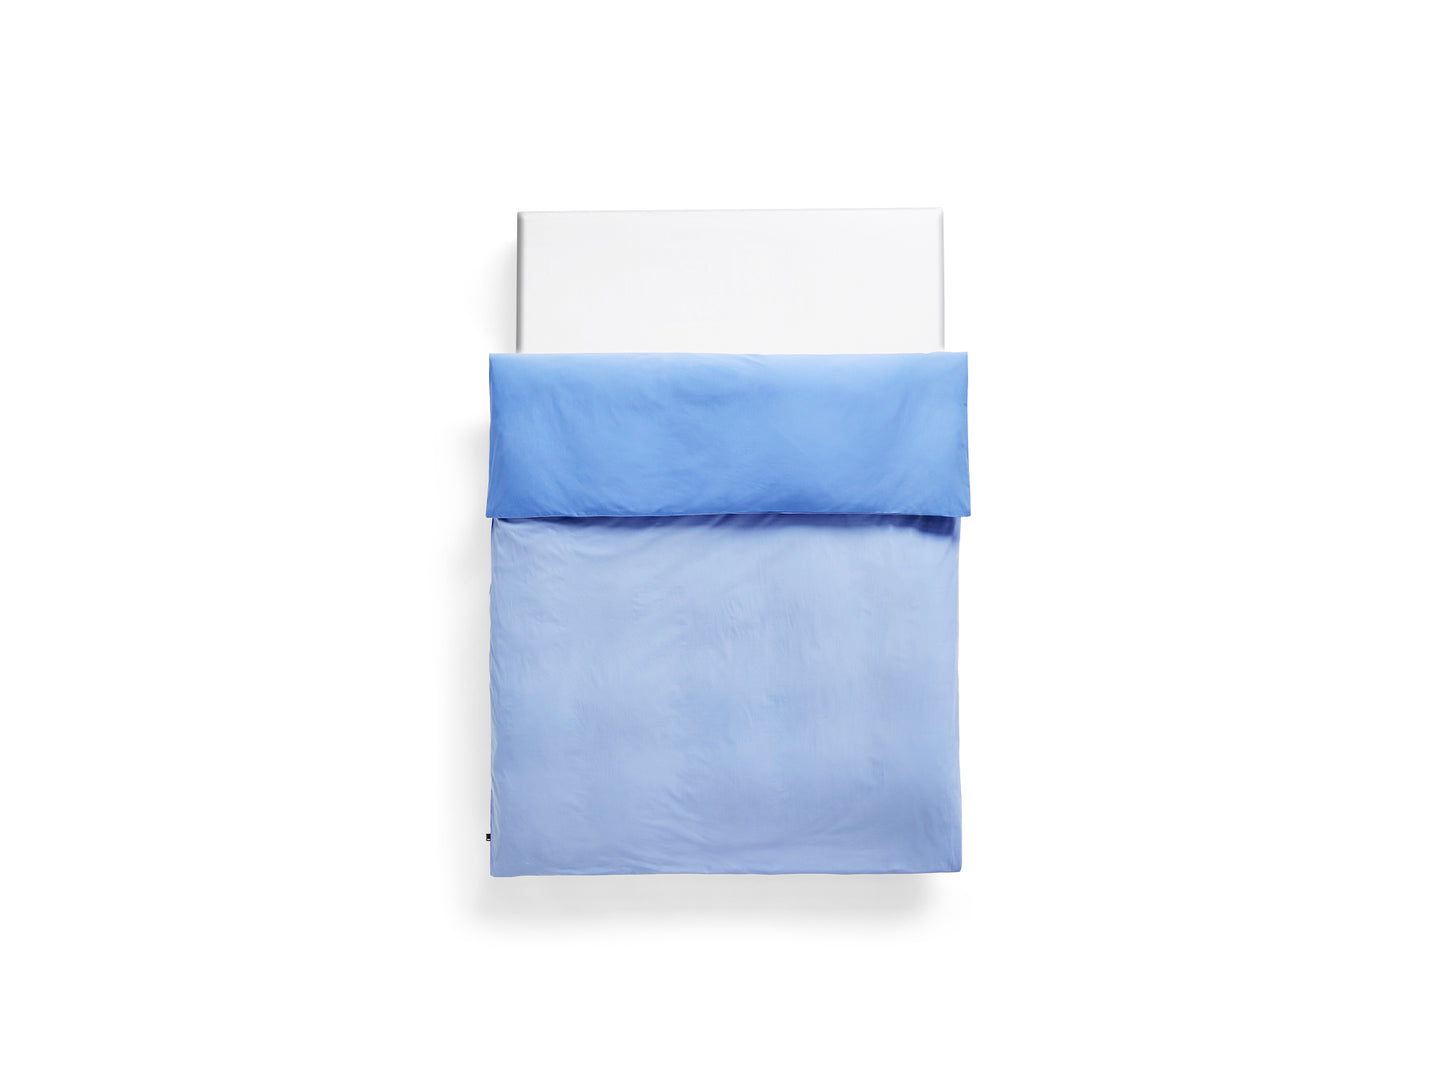 Duo Bed Linen by HAY - Duvet Cover / Sky Blue